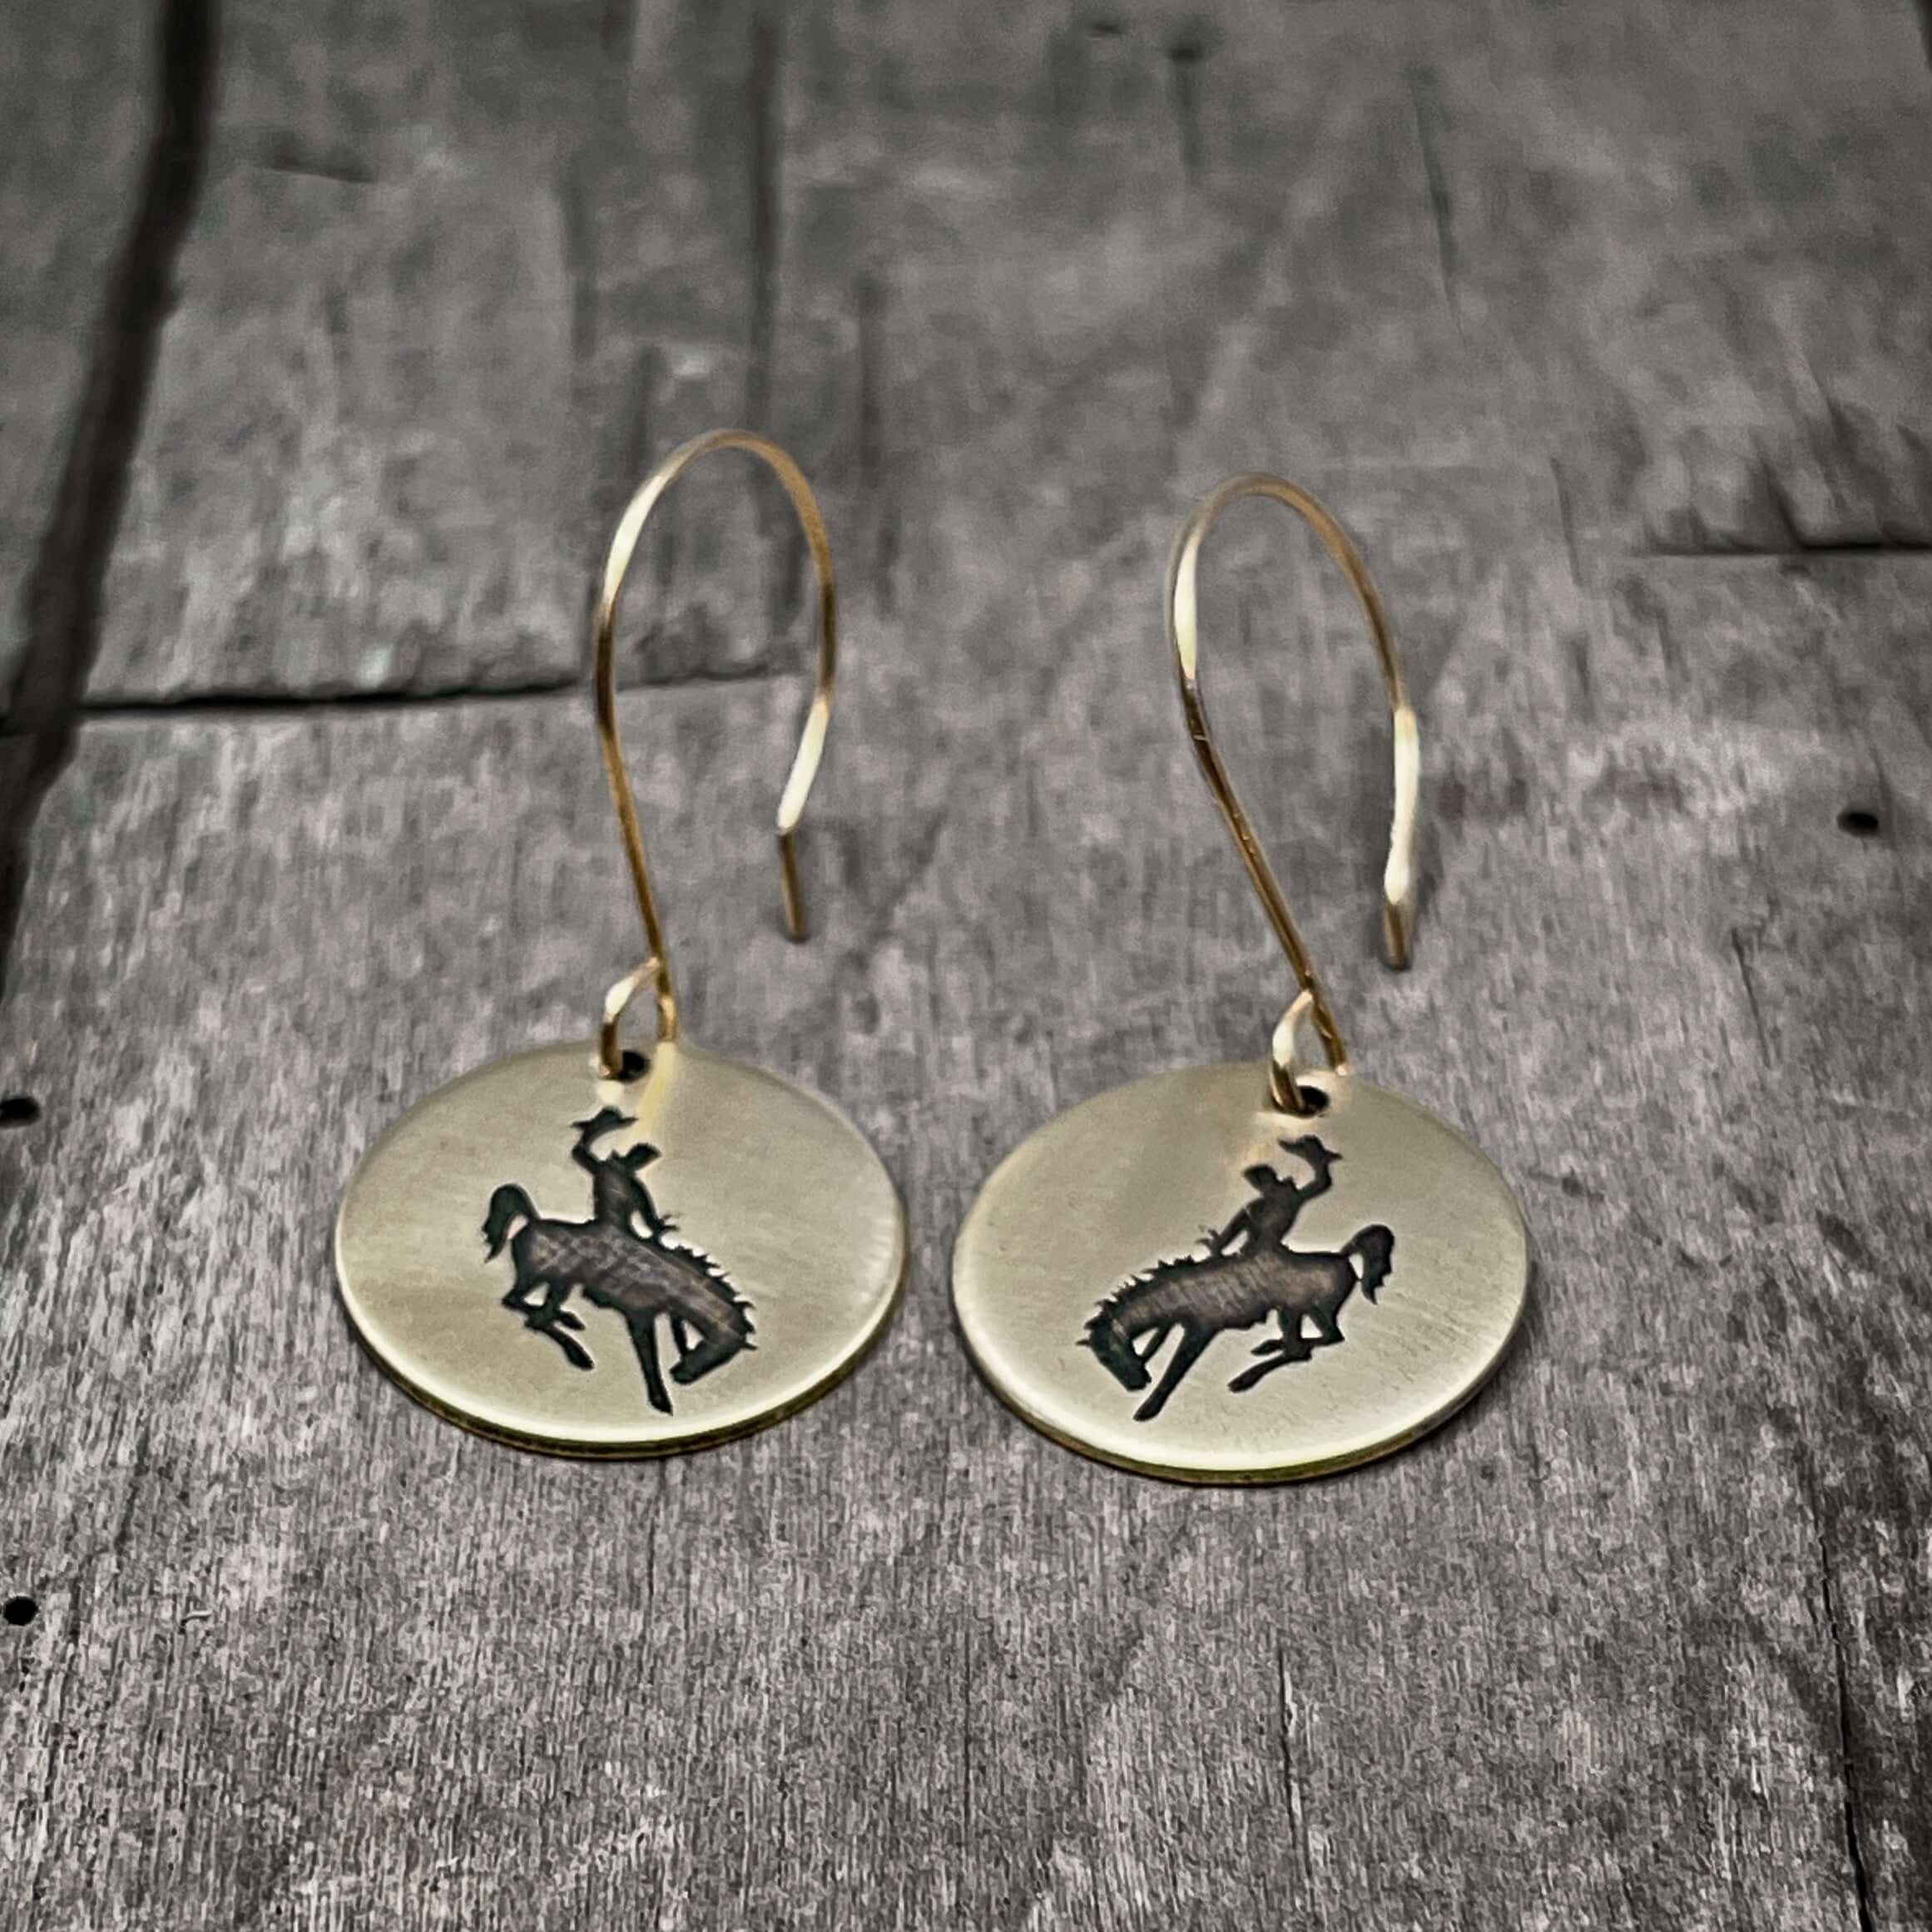 Louisiana Wild Earrings | Mimosa Handcrafted Sterling Silver